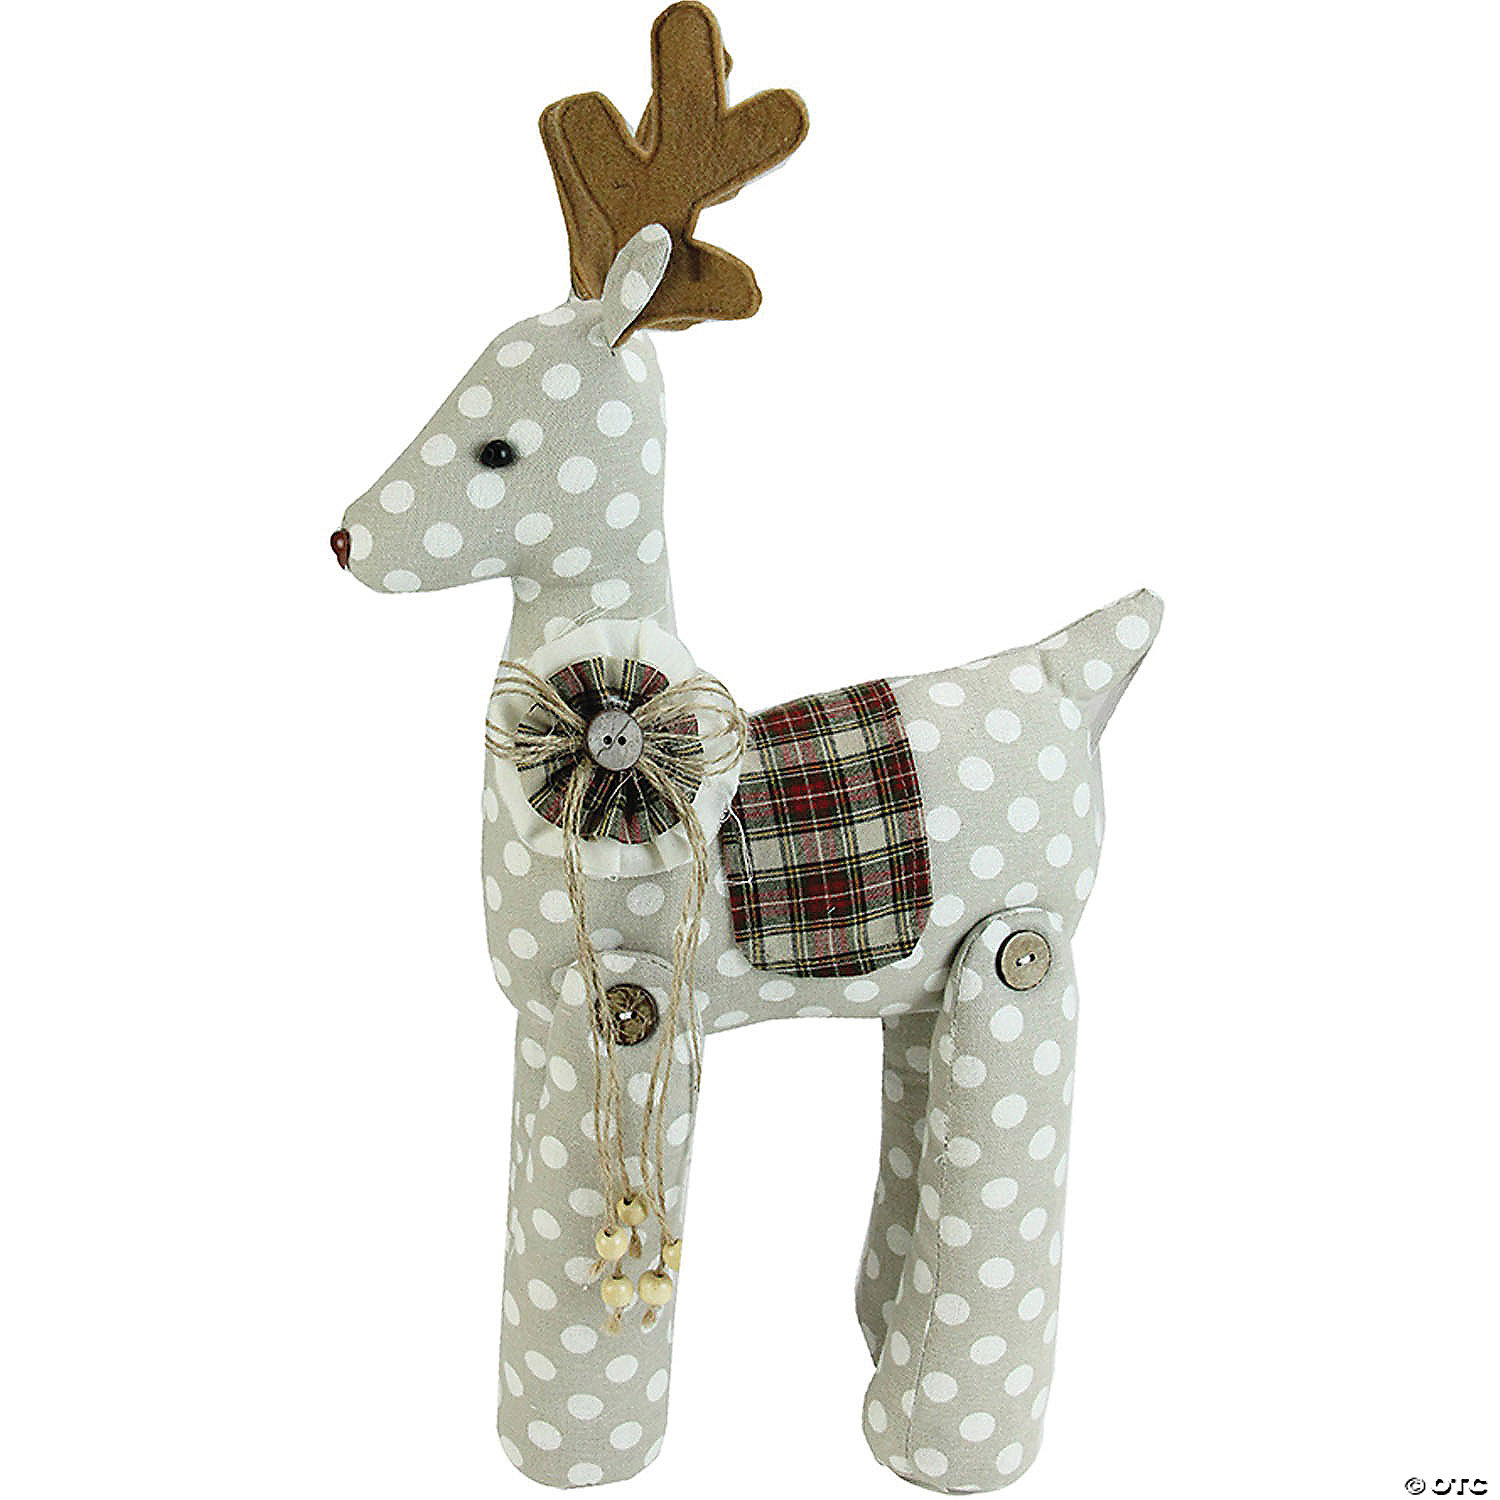 Details about   1X Table Ornament Reindeer Design Indoor Christmas Standing Decoration Supplies